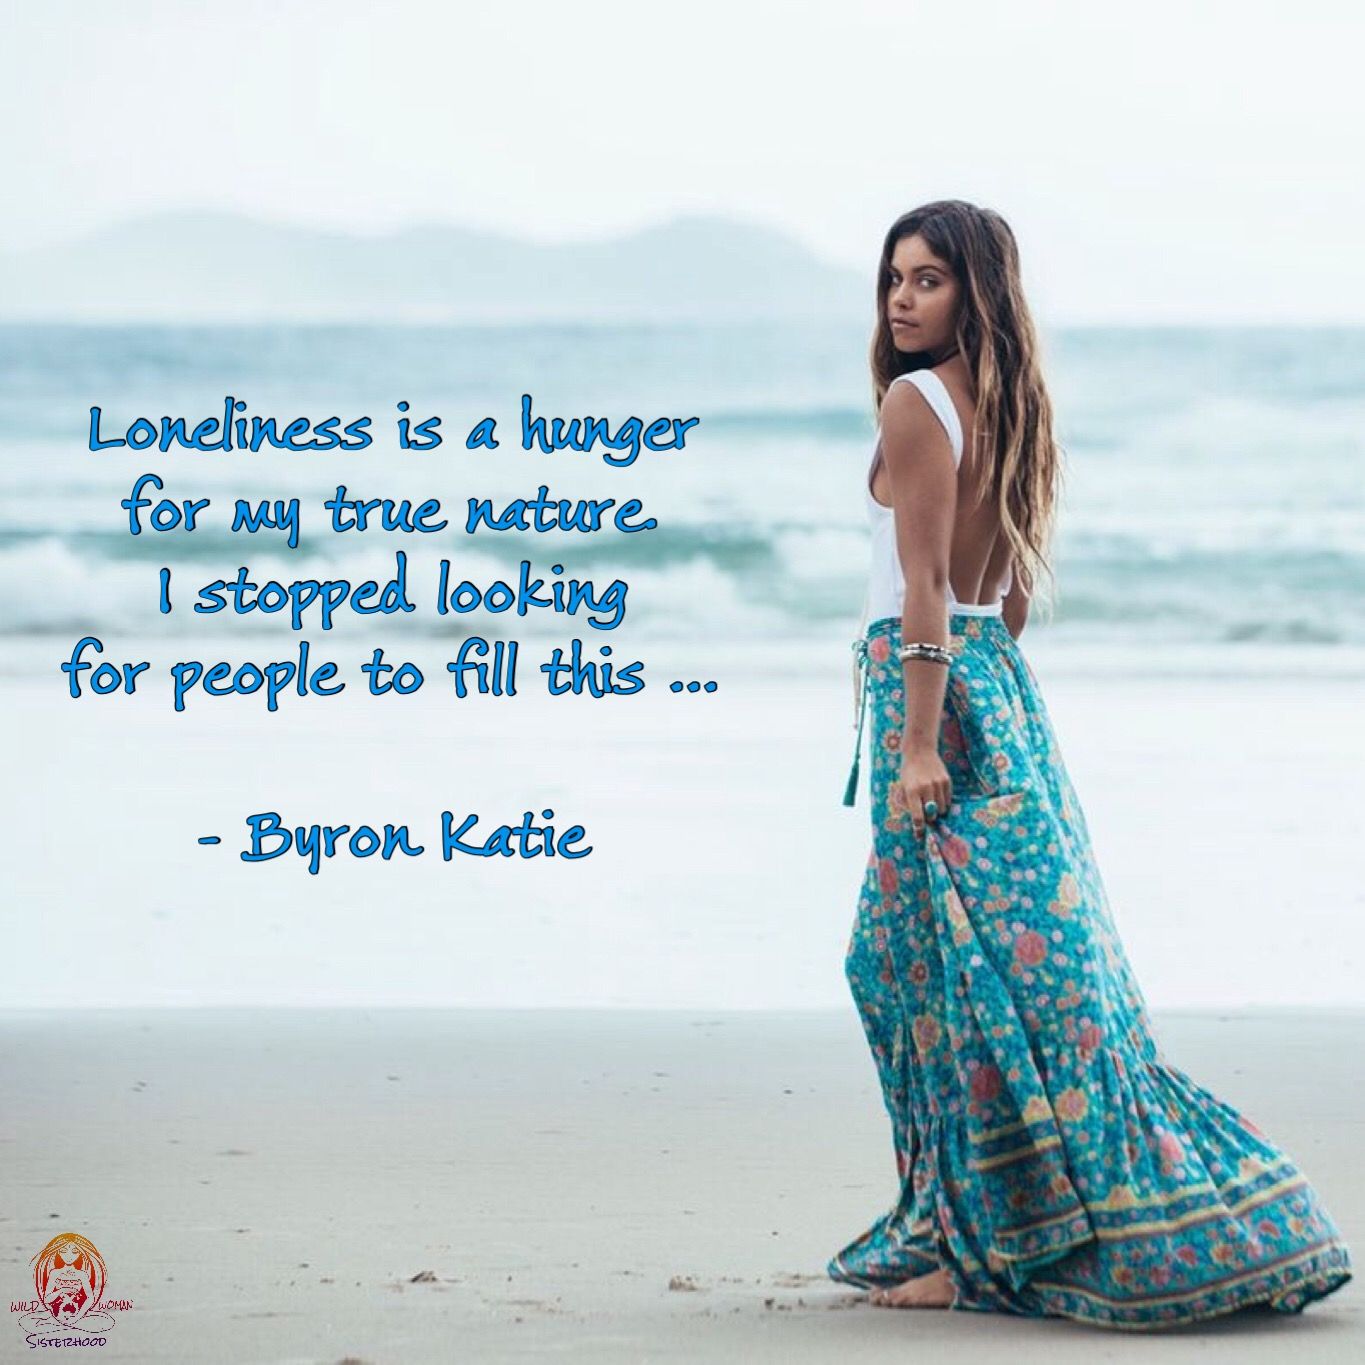 Loneliness is a hunger for my true nature. I stopped looking for people to fill this. ~ Byron Katie. WILD WOMAN SISTERHOODॐ #WildWomanSisterhood #byronkatie #solitude